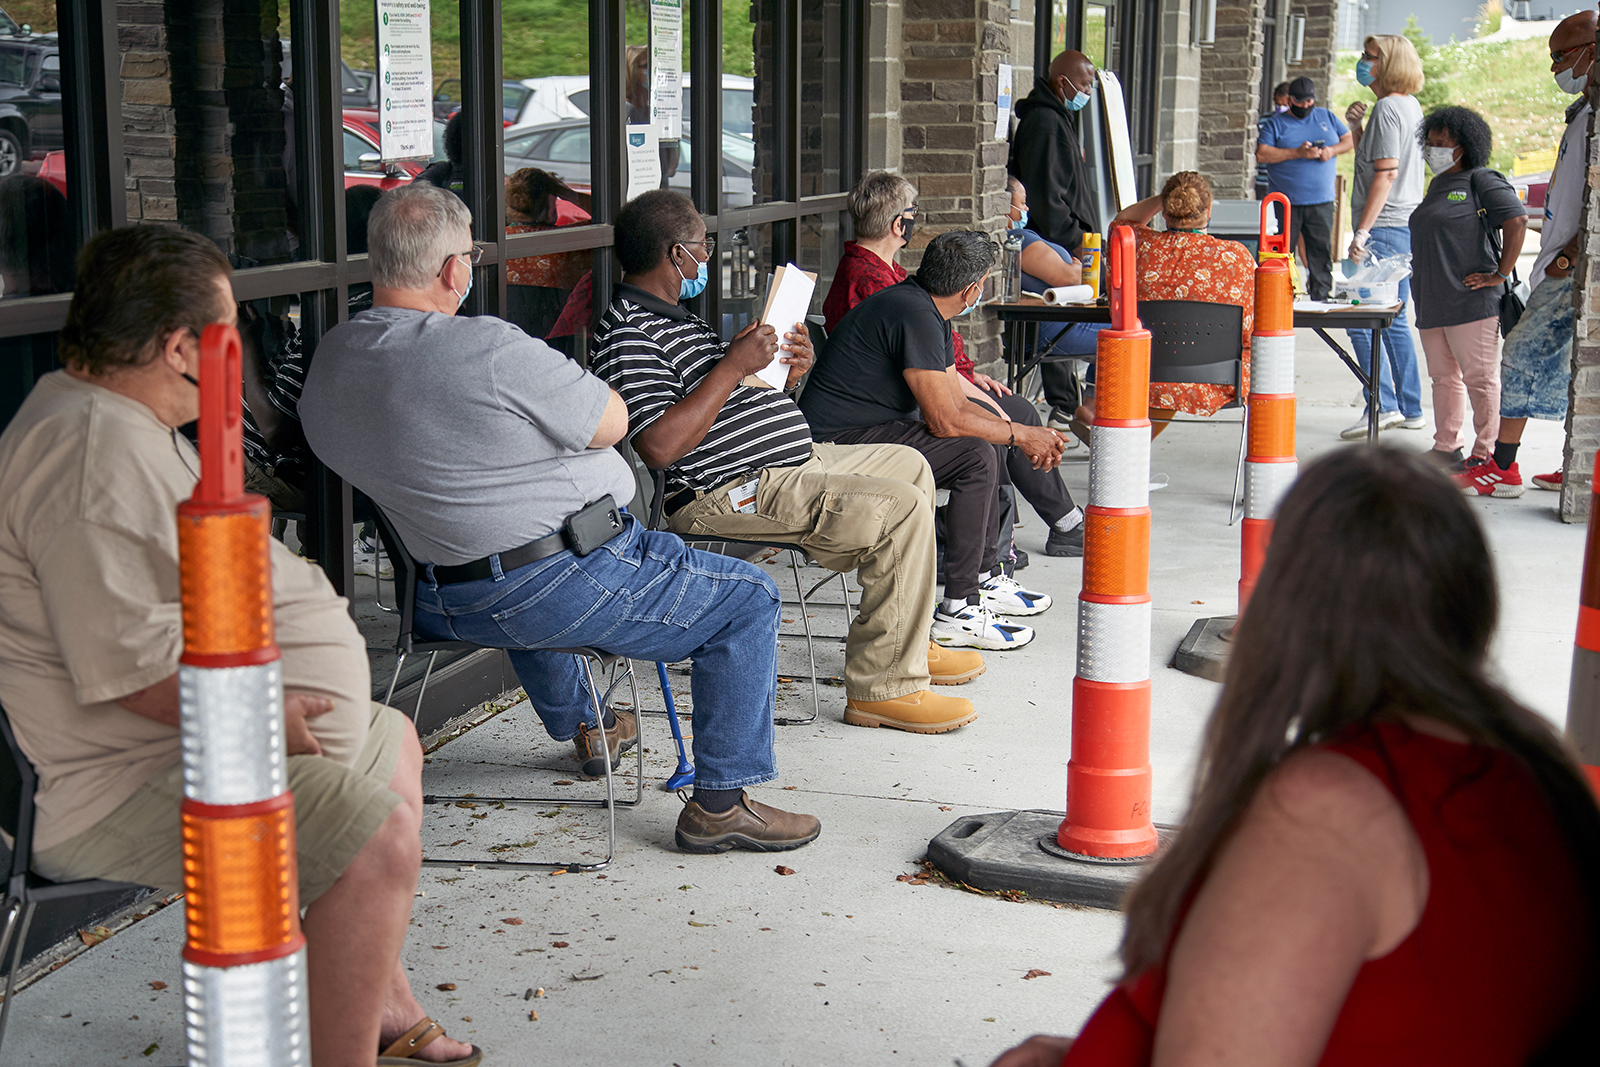 Job seekers exercise social distancing as they wait to be called into the Heartland Workforce Solutions office in Omaha, Nebraska, on Wednesday, July 15.